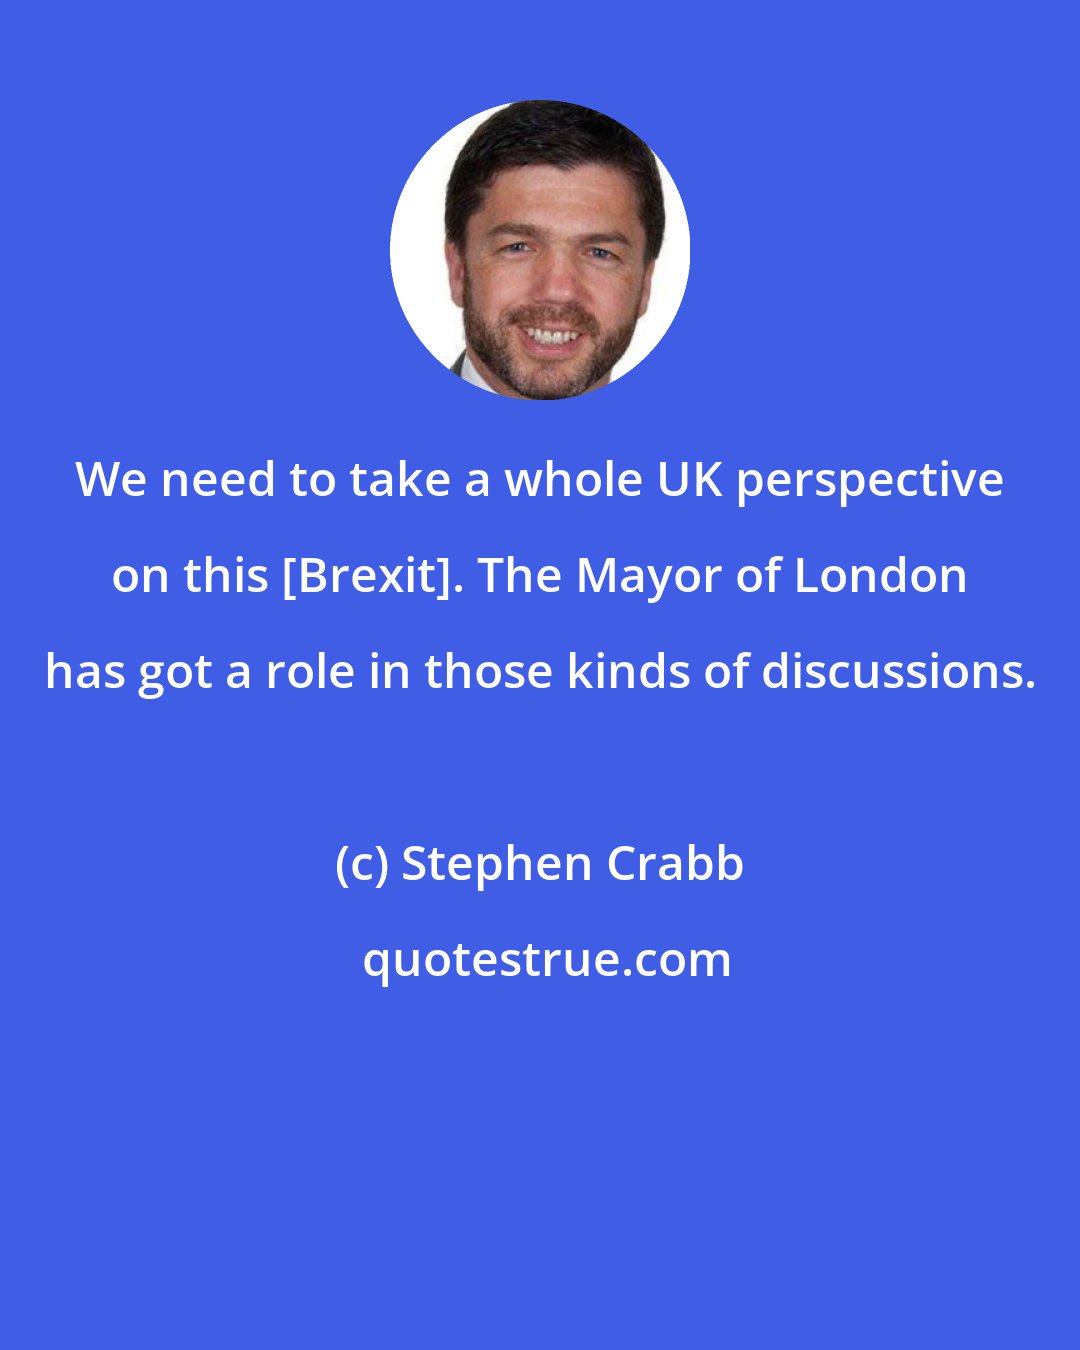 Stephen Crabb: We need to take a whole UK perspective on this [Brexit]. The Mayor of London has got a role in those kinds of discussions.